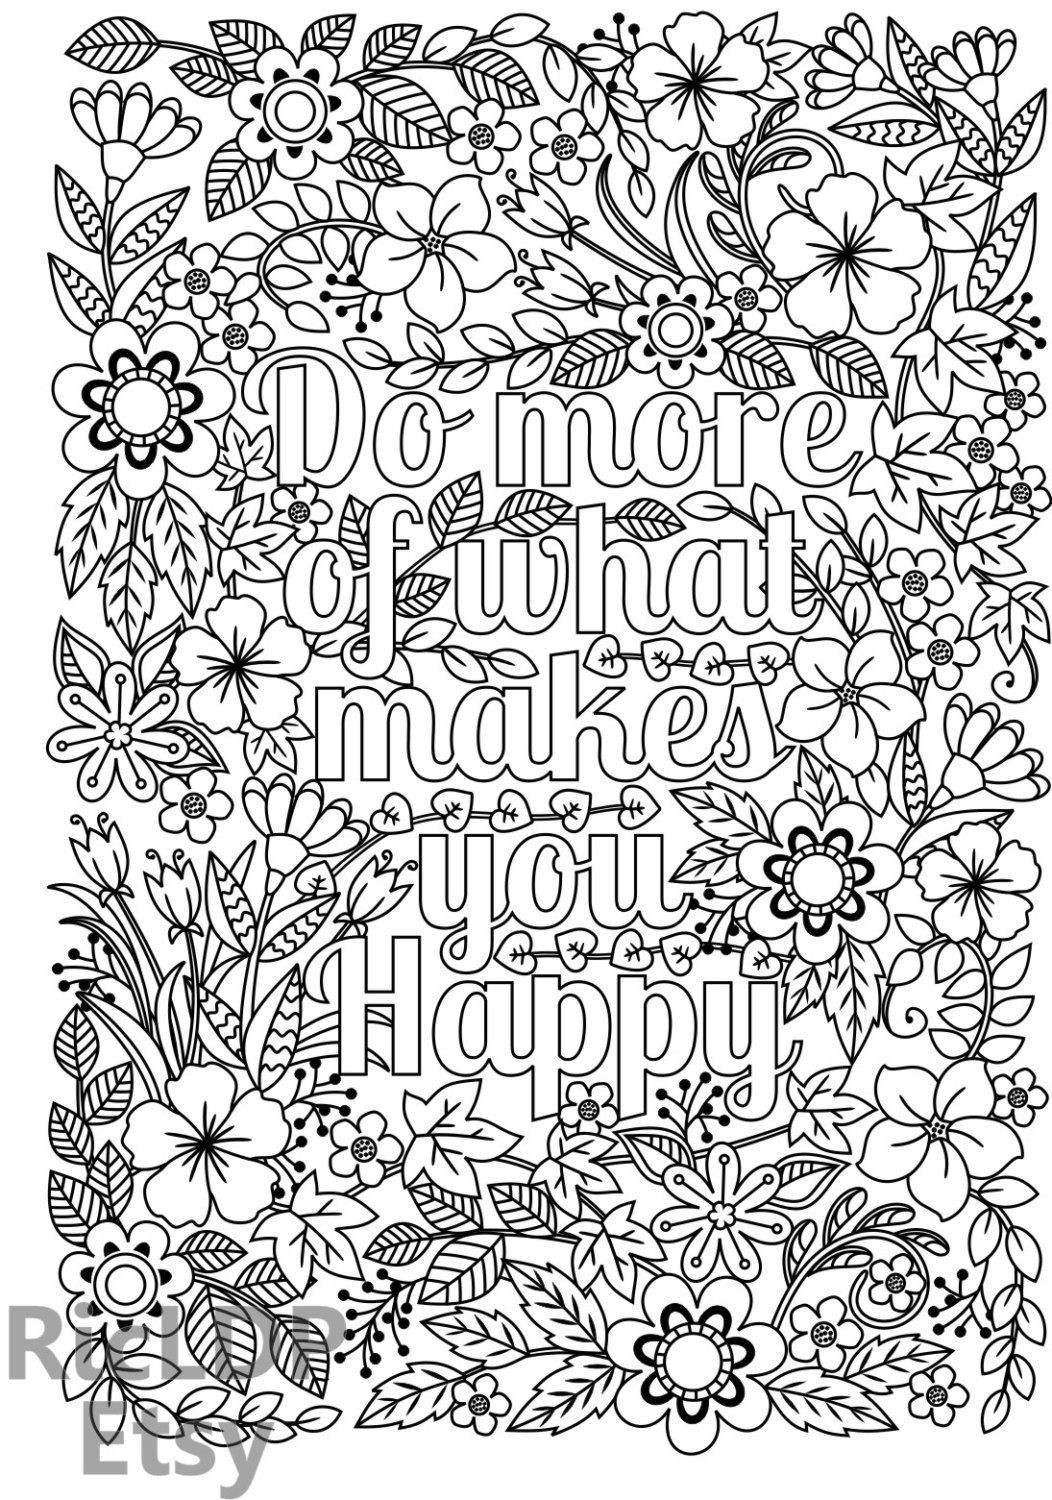 Free Coloring Pages For Adults Printable
 Do More of What Makes You Happy Coloring Page for Kids